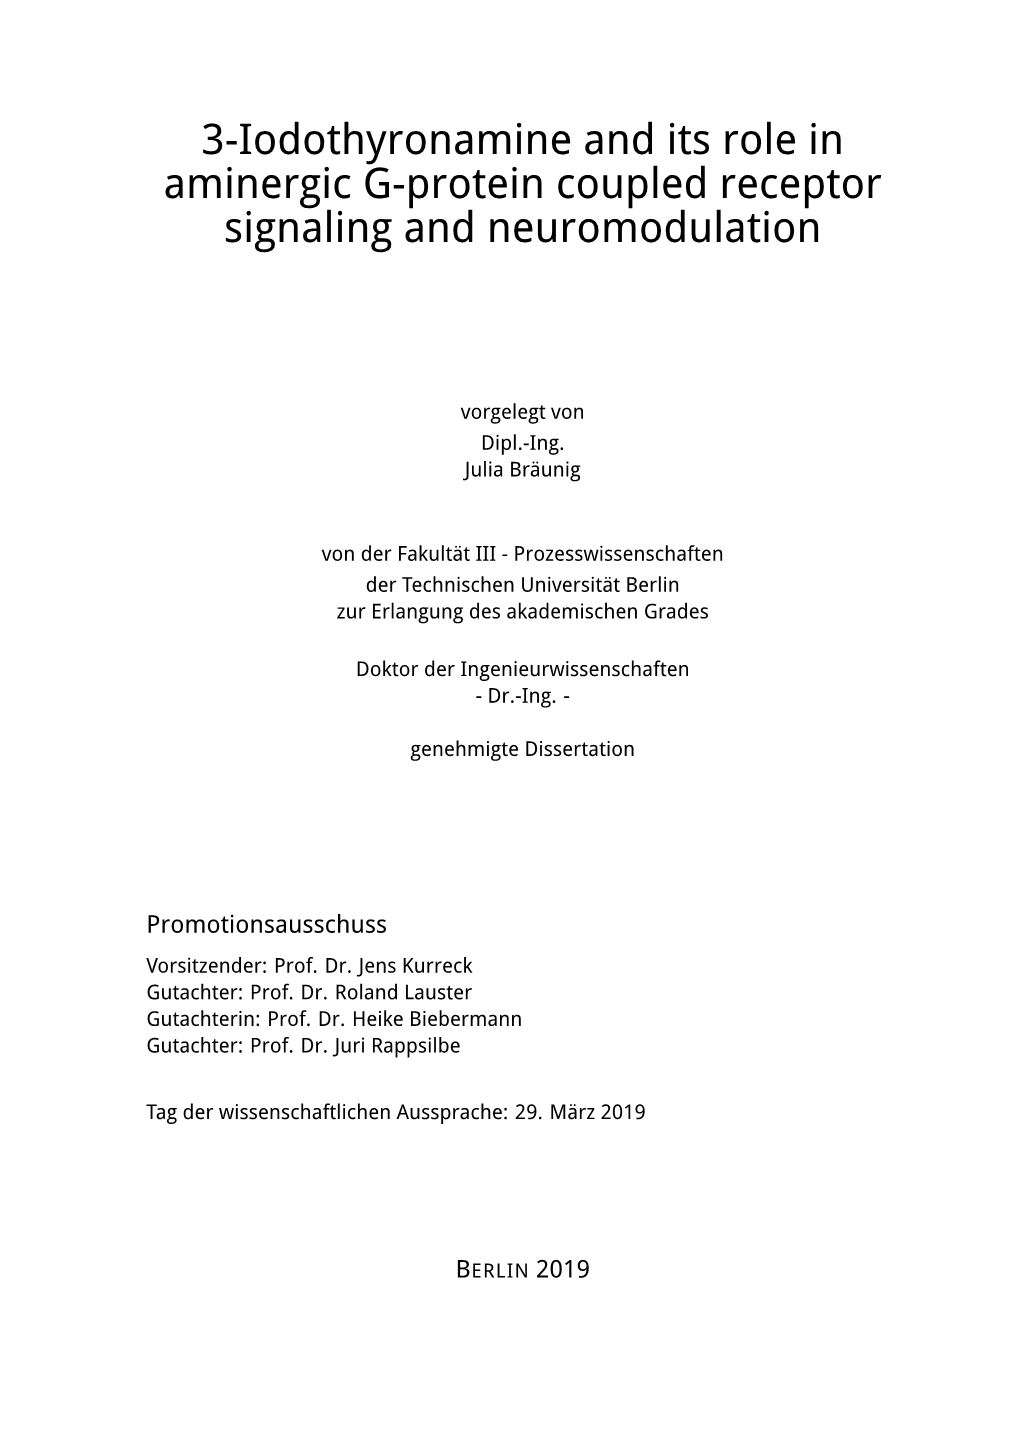 3-Iodothyronamine and Its Role in Aminergic G-Protein Coupled Receptor Signaling and Neuromodulation